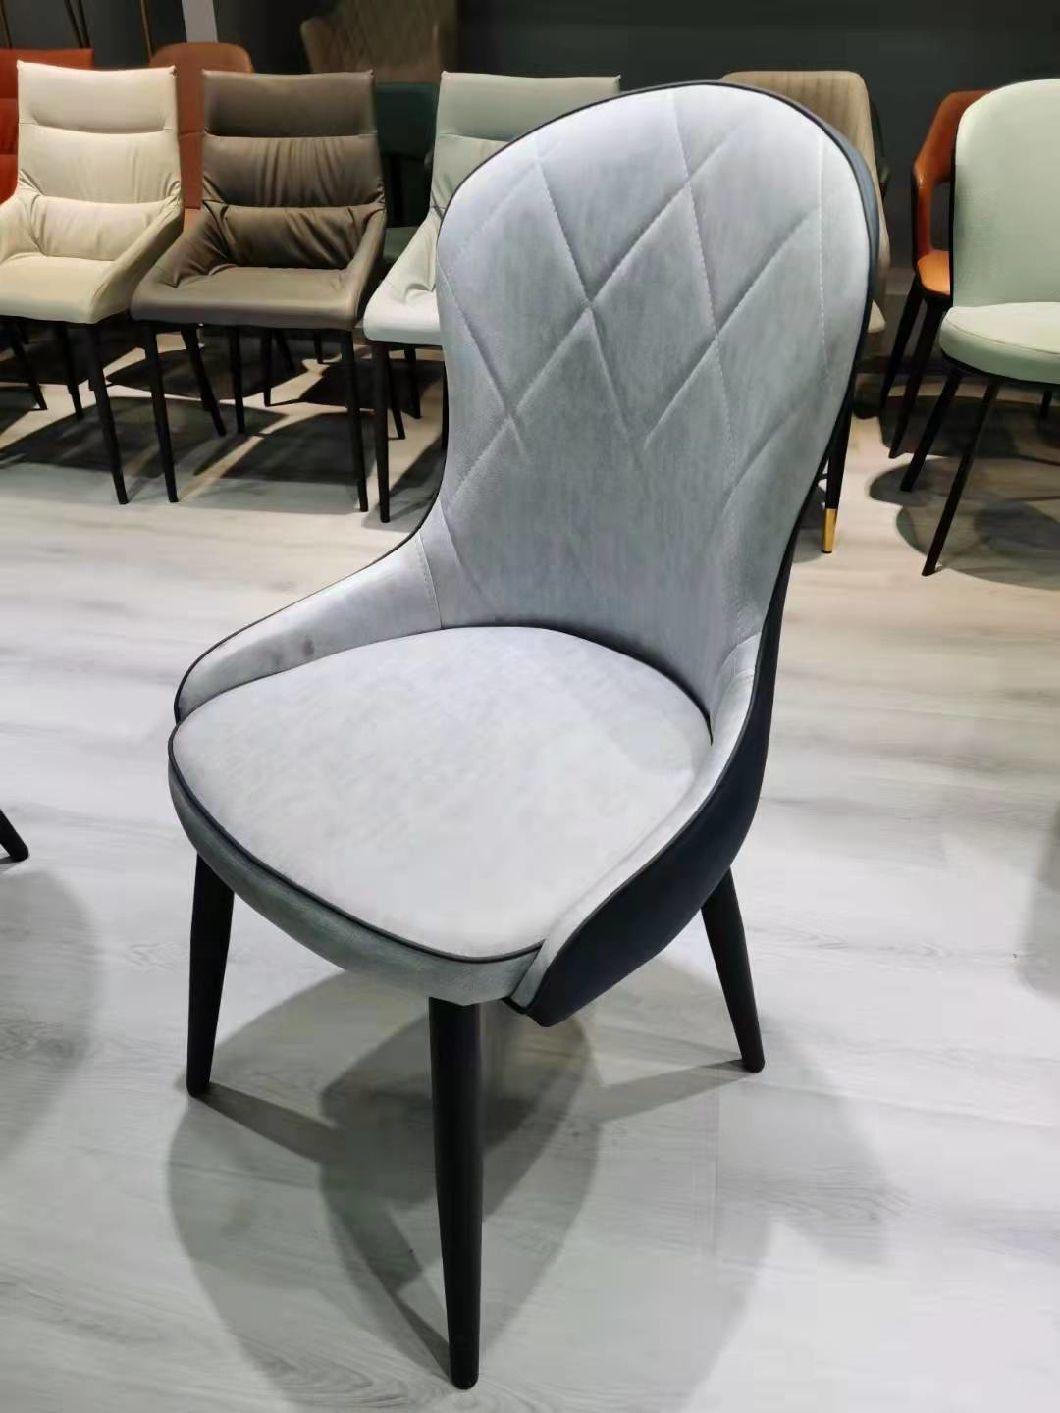 Wholesale Home Furniture Optional Multi-Color PU Leather Dining Chair